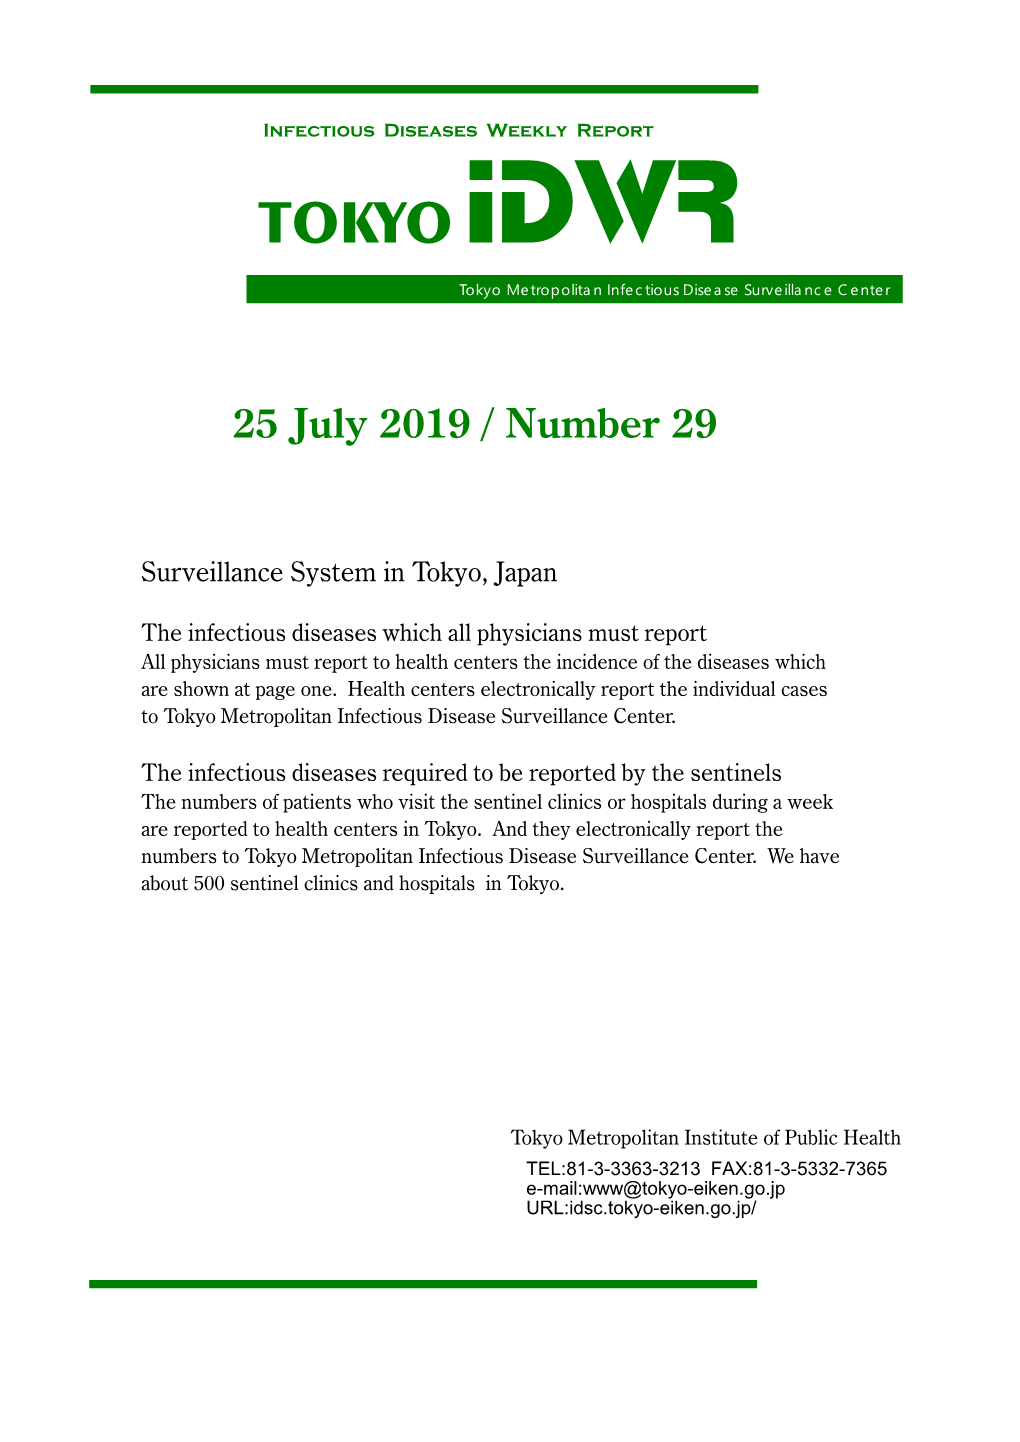 Infectious Diseases Weekly Report TOKYO IDWR